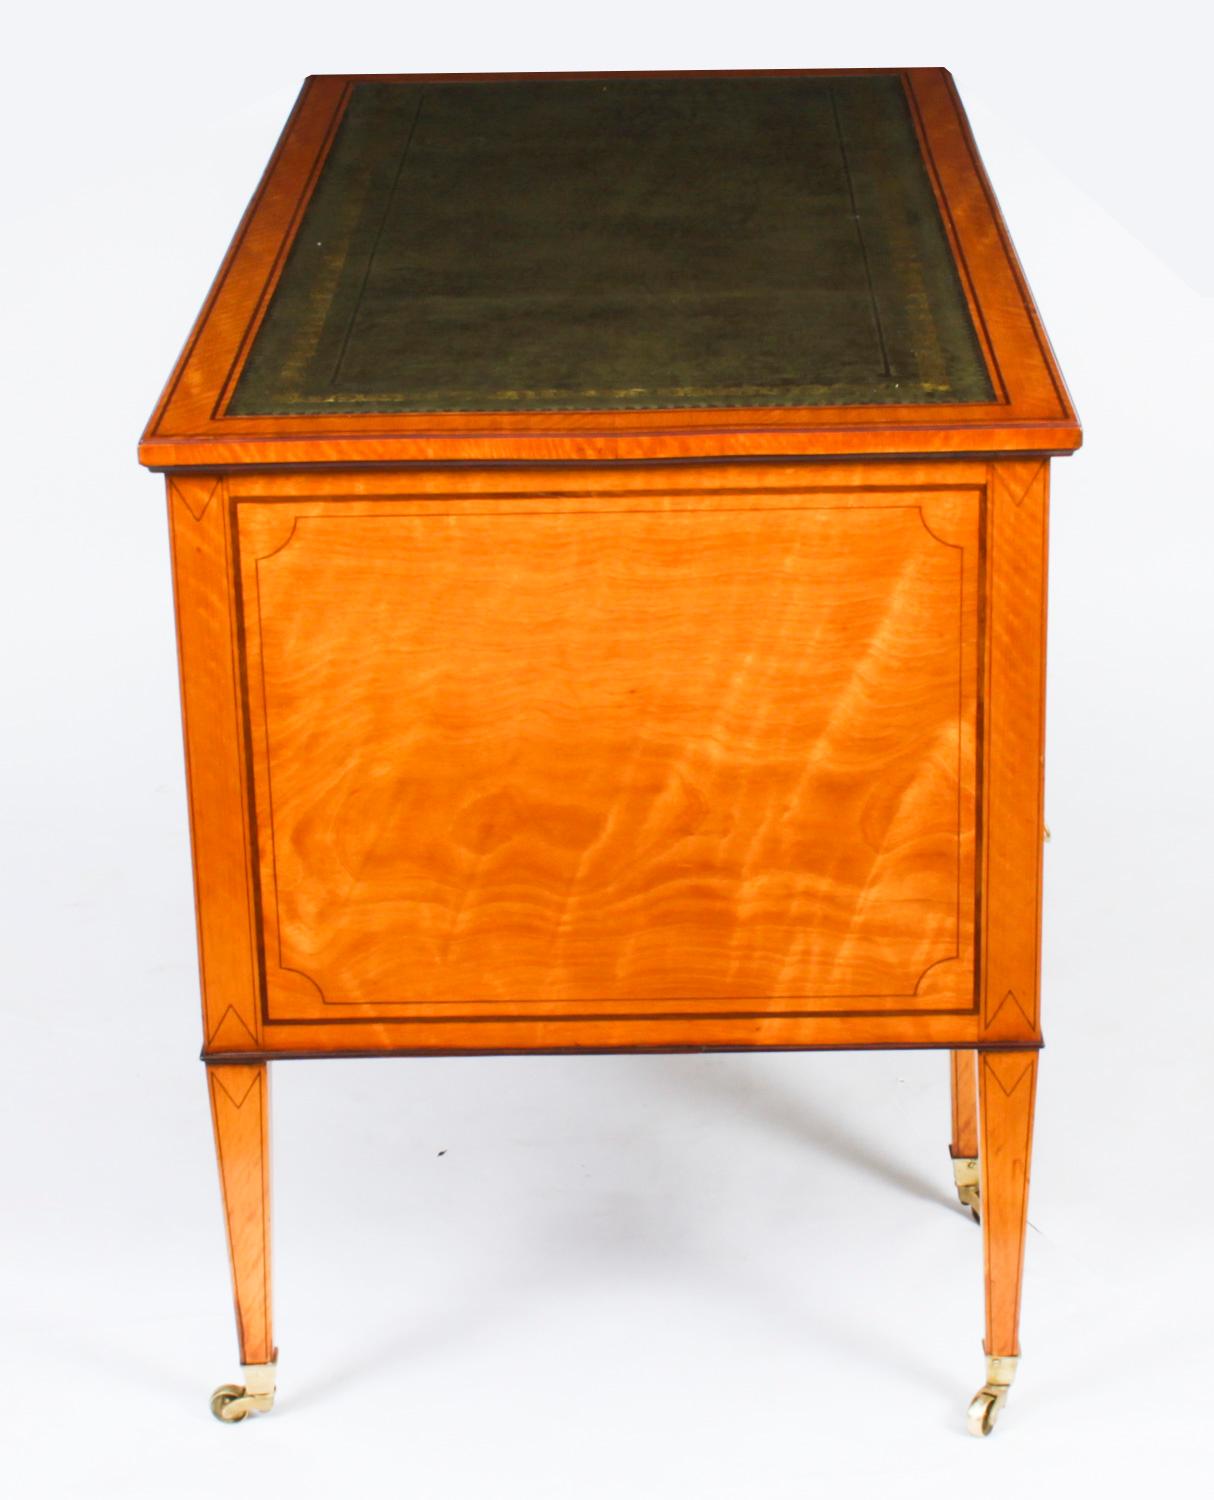 Antique Inlaid Satinwood Writing Table Desk by Edwards & Roberts, 19th Century 11